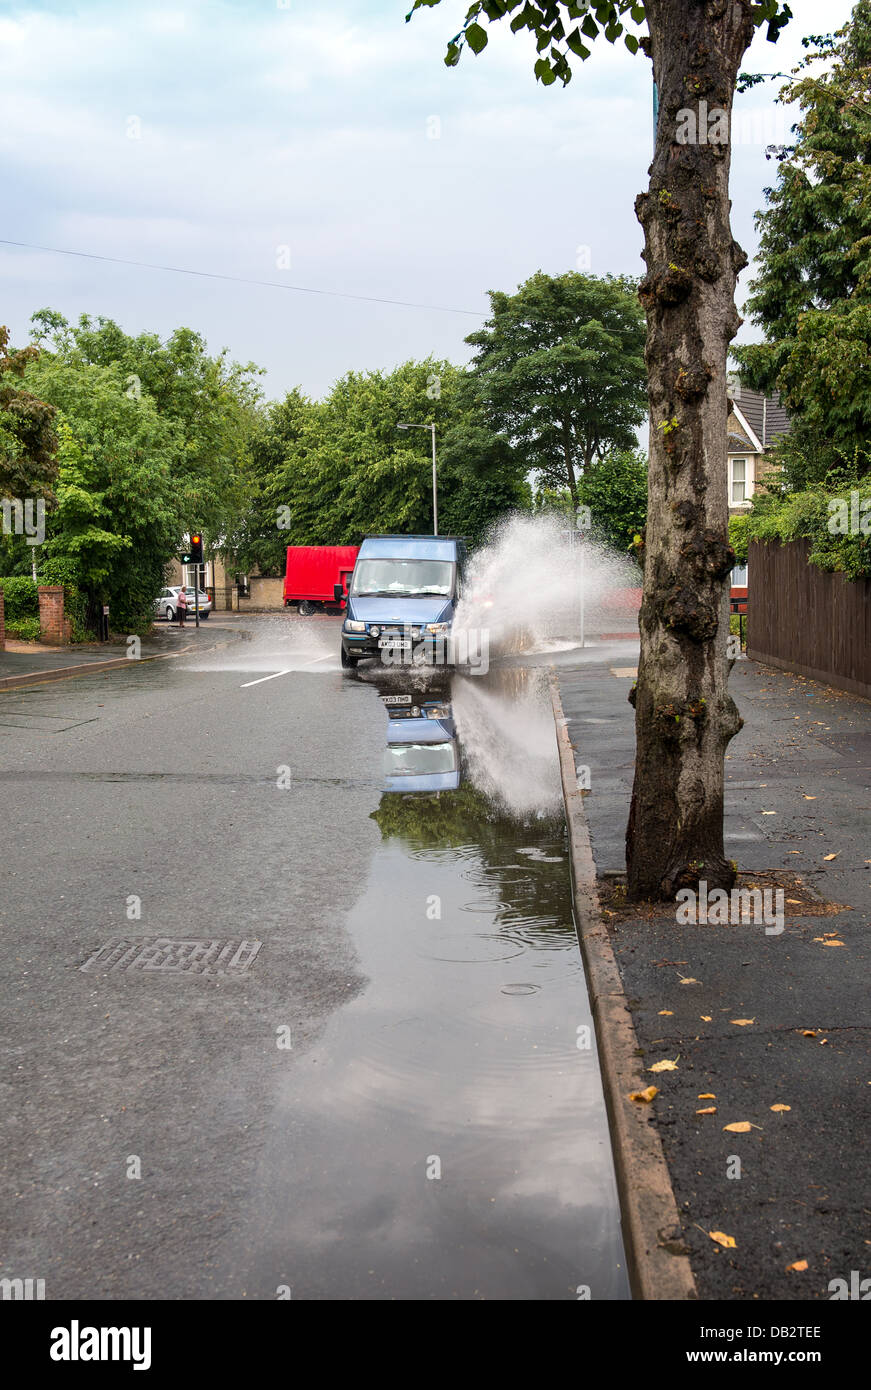 Van driving through puddle on side of road. Stock Photo